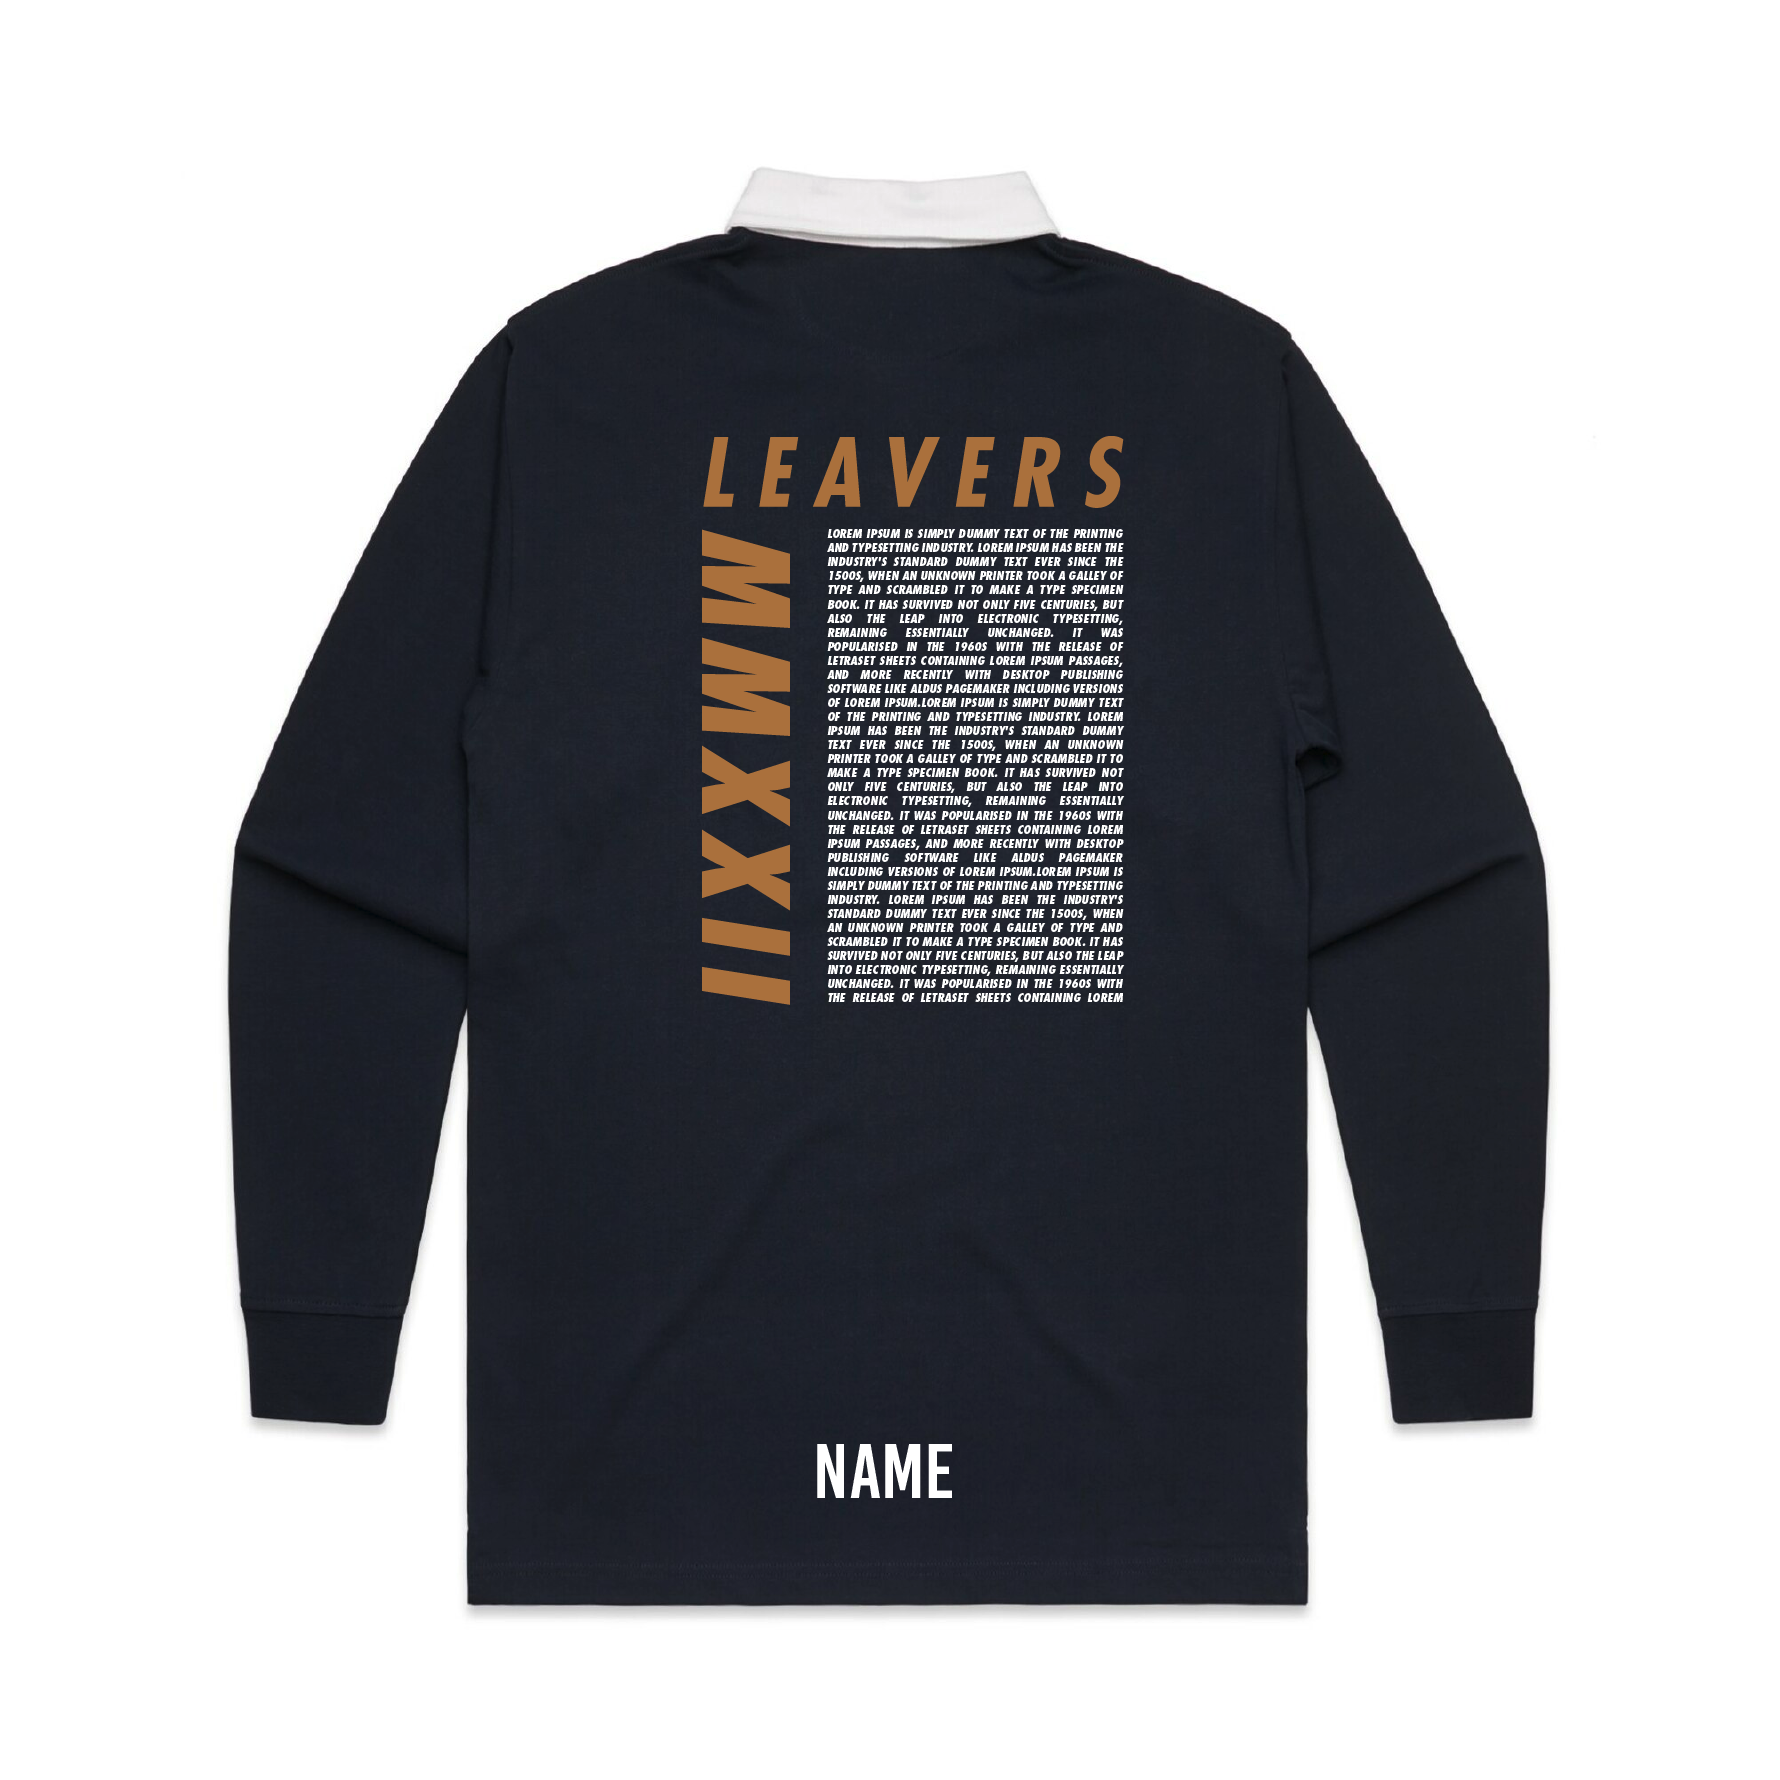 Hawera High School Leavers 2022 - AS Colour Rugby Jersey - Custom Clothing | T Shirt Printing | Embroidery | Screen Printing | Print Room NZ